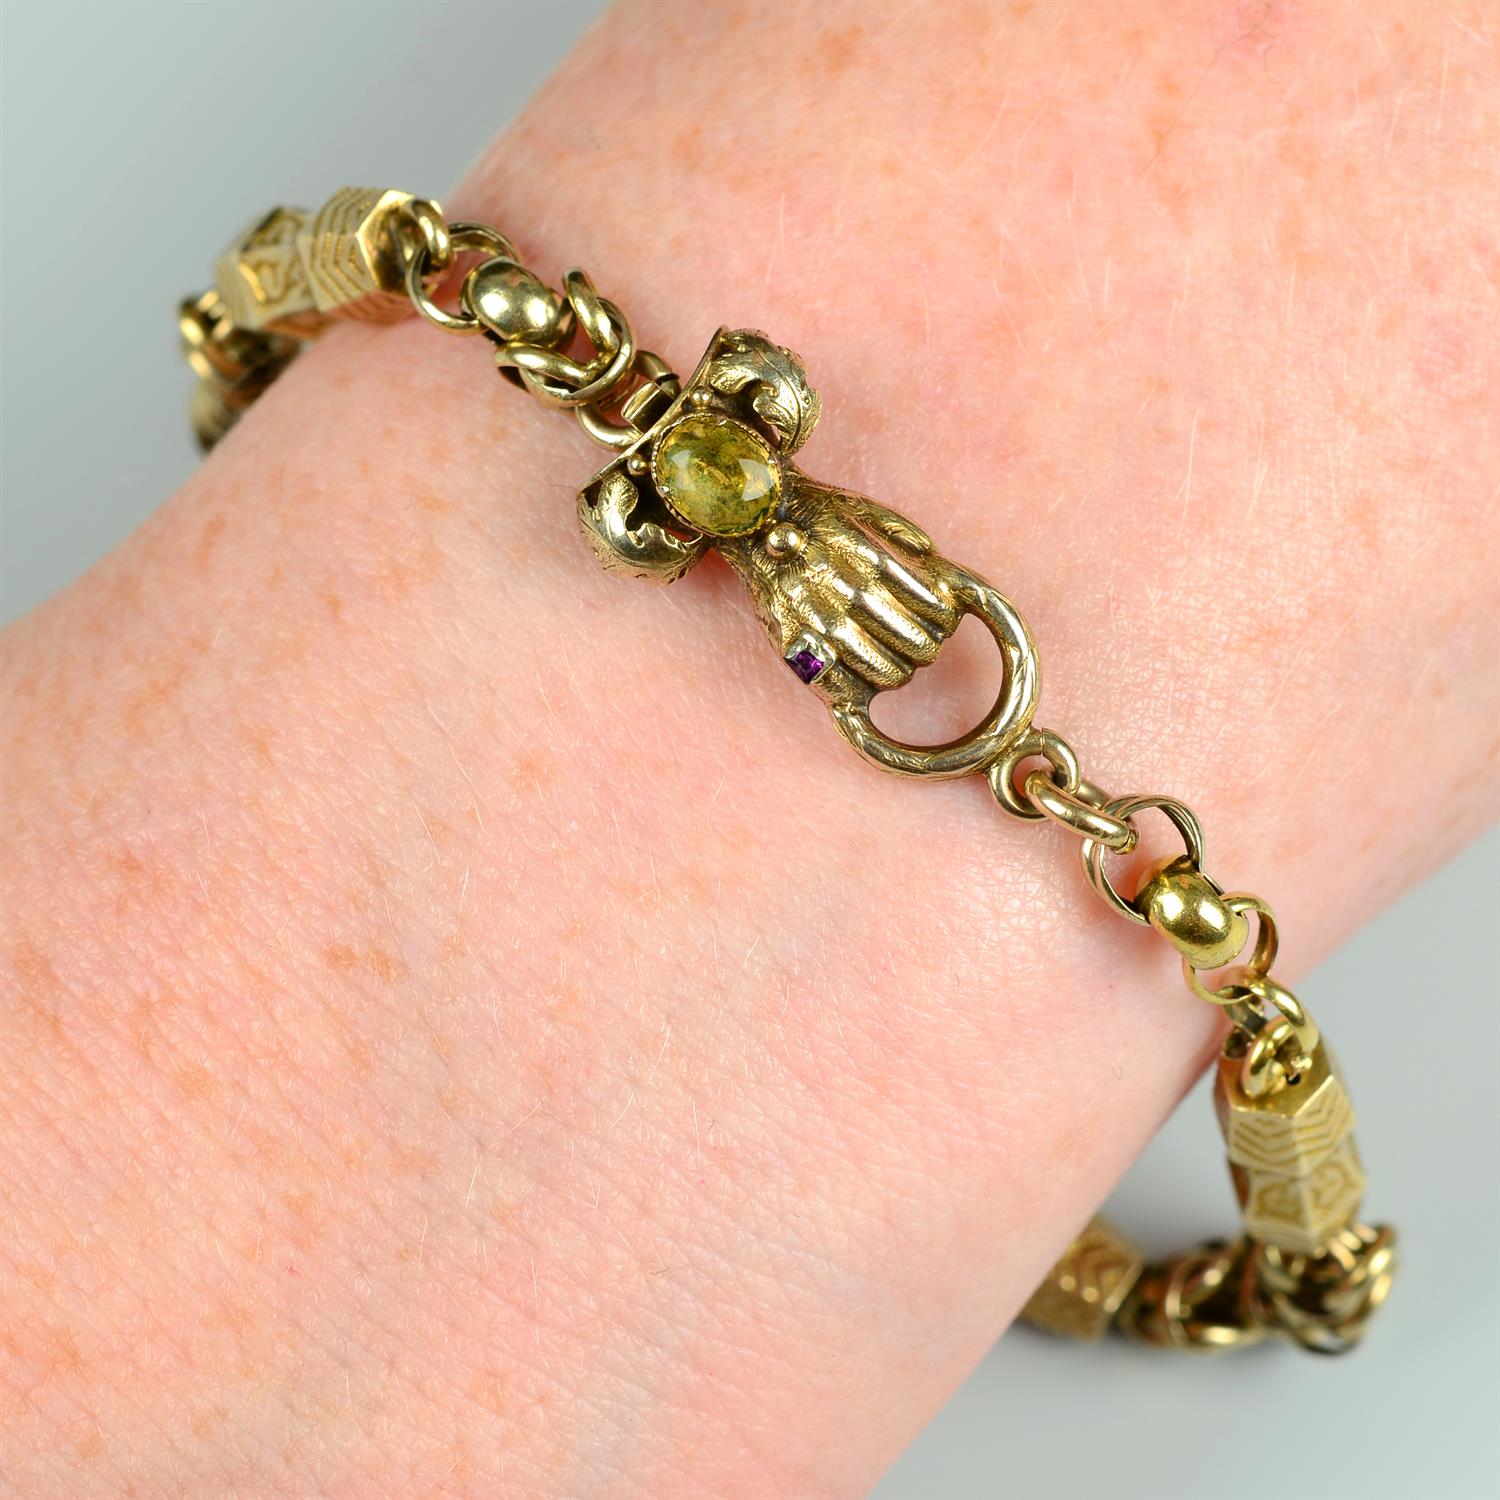 An early to mid 19th century gold, engraved spacer Kings-link bracelet, with ruby ring accent